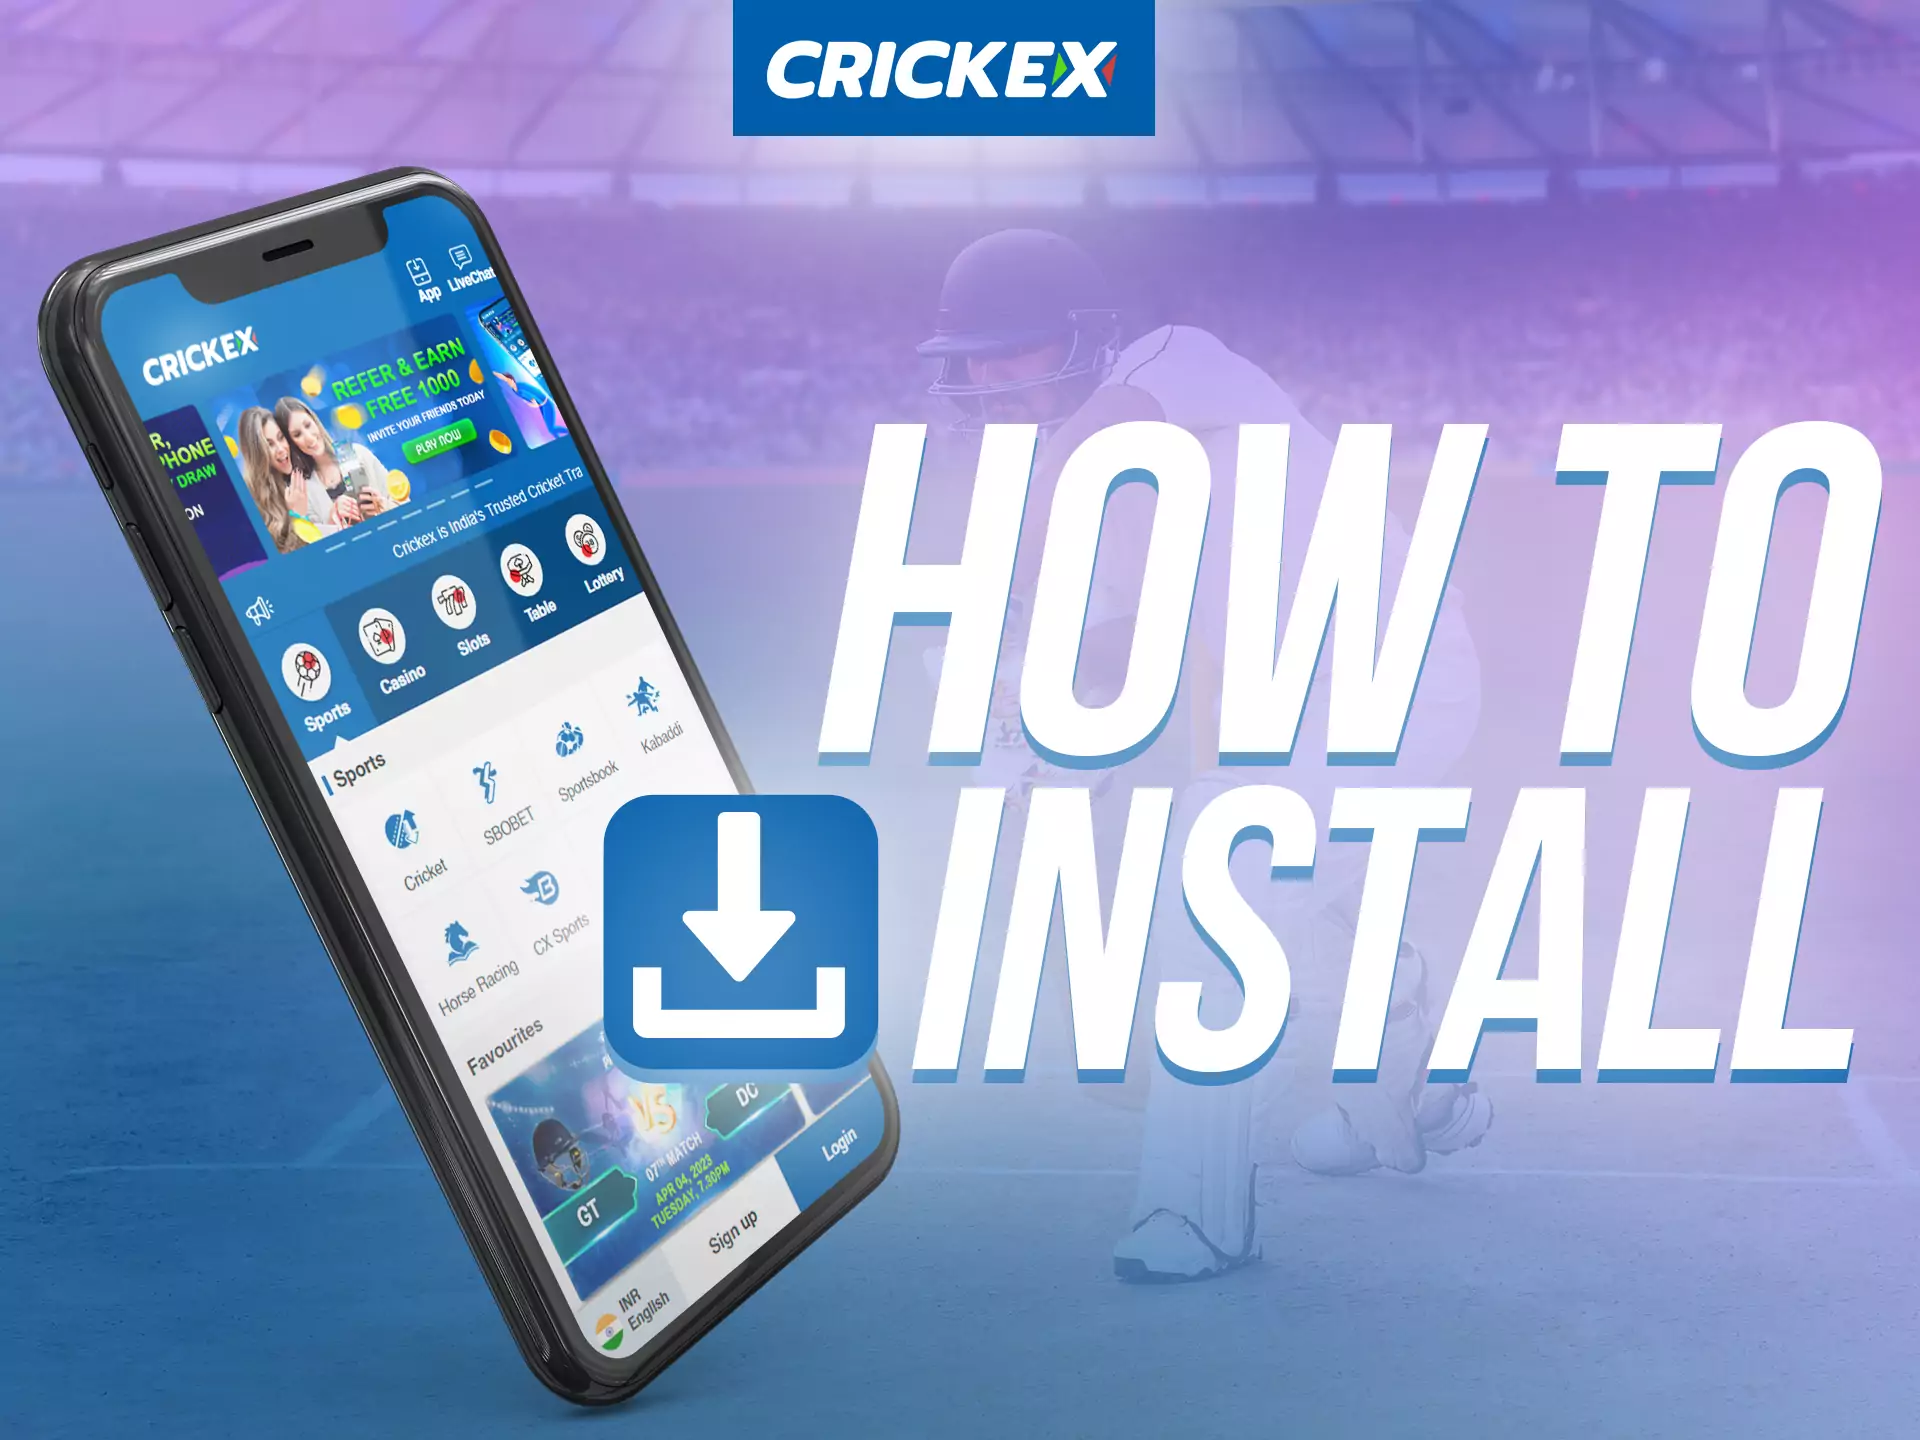 Learn how to easily install the Crickex app on your device.